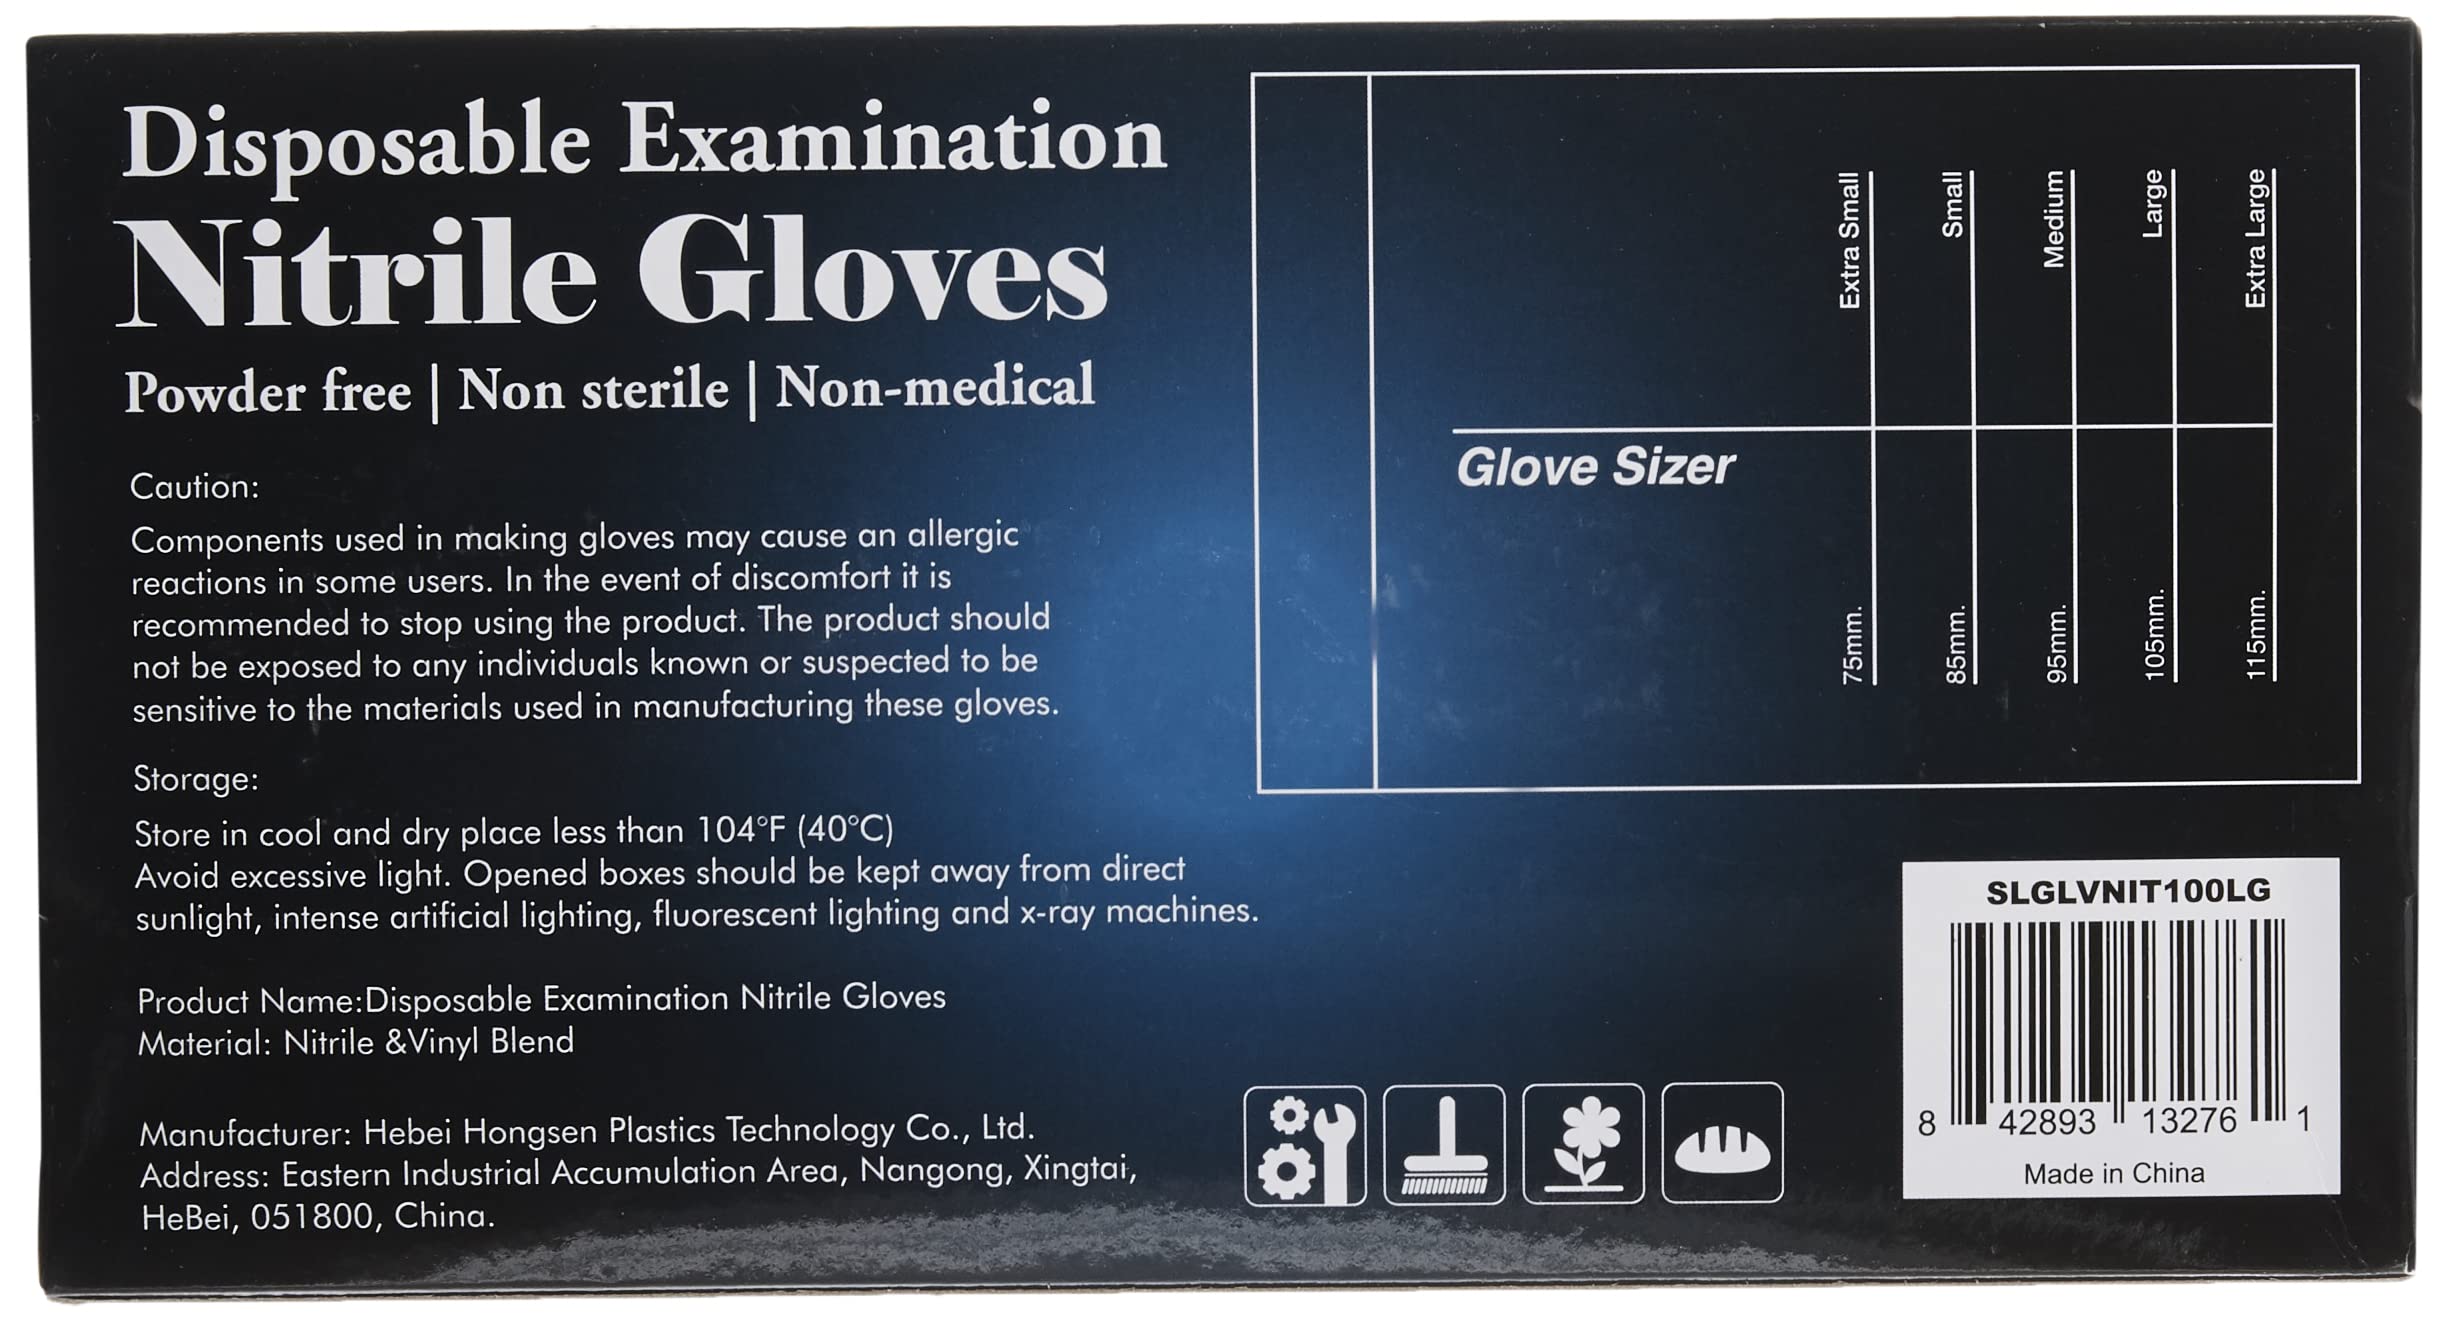 Nitrile Disposable Latex & Powder Free Gloves - Great for Exams, Kitchens, Food Handling & Cleaning Supplies - Soft & Comfortable fit - Vinyl & Nitrile blend - Size Large -100 Pack